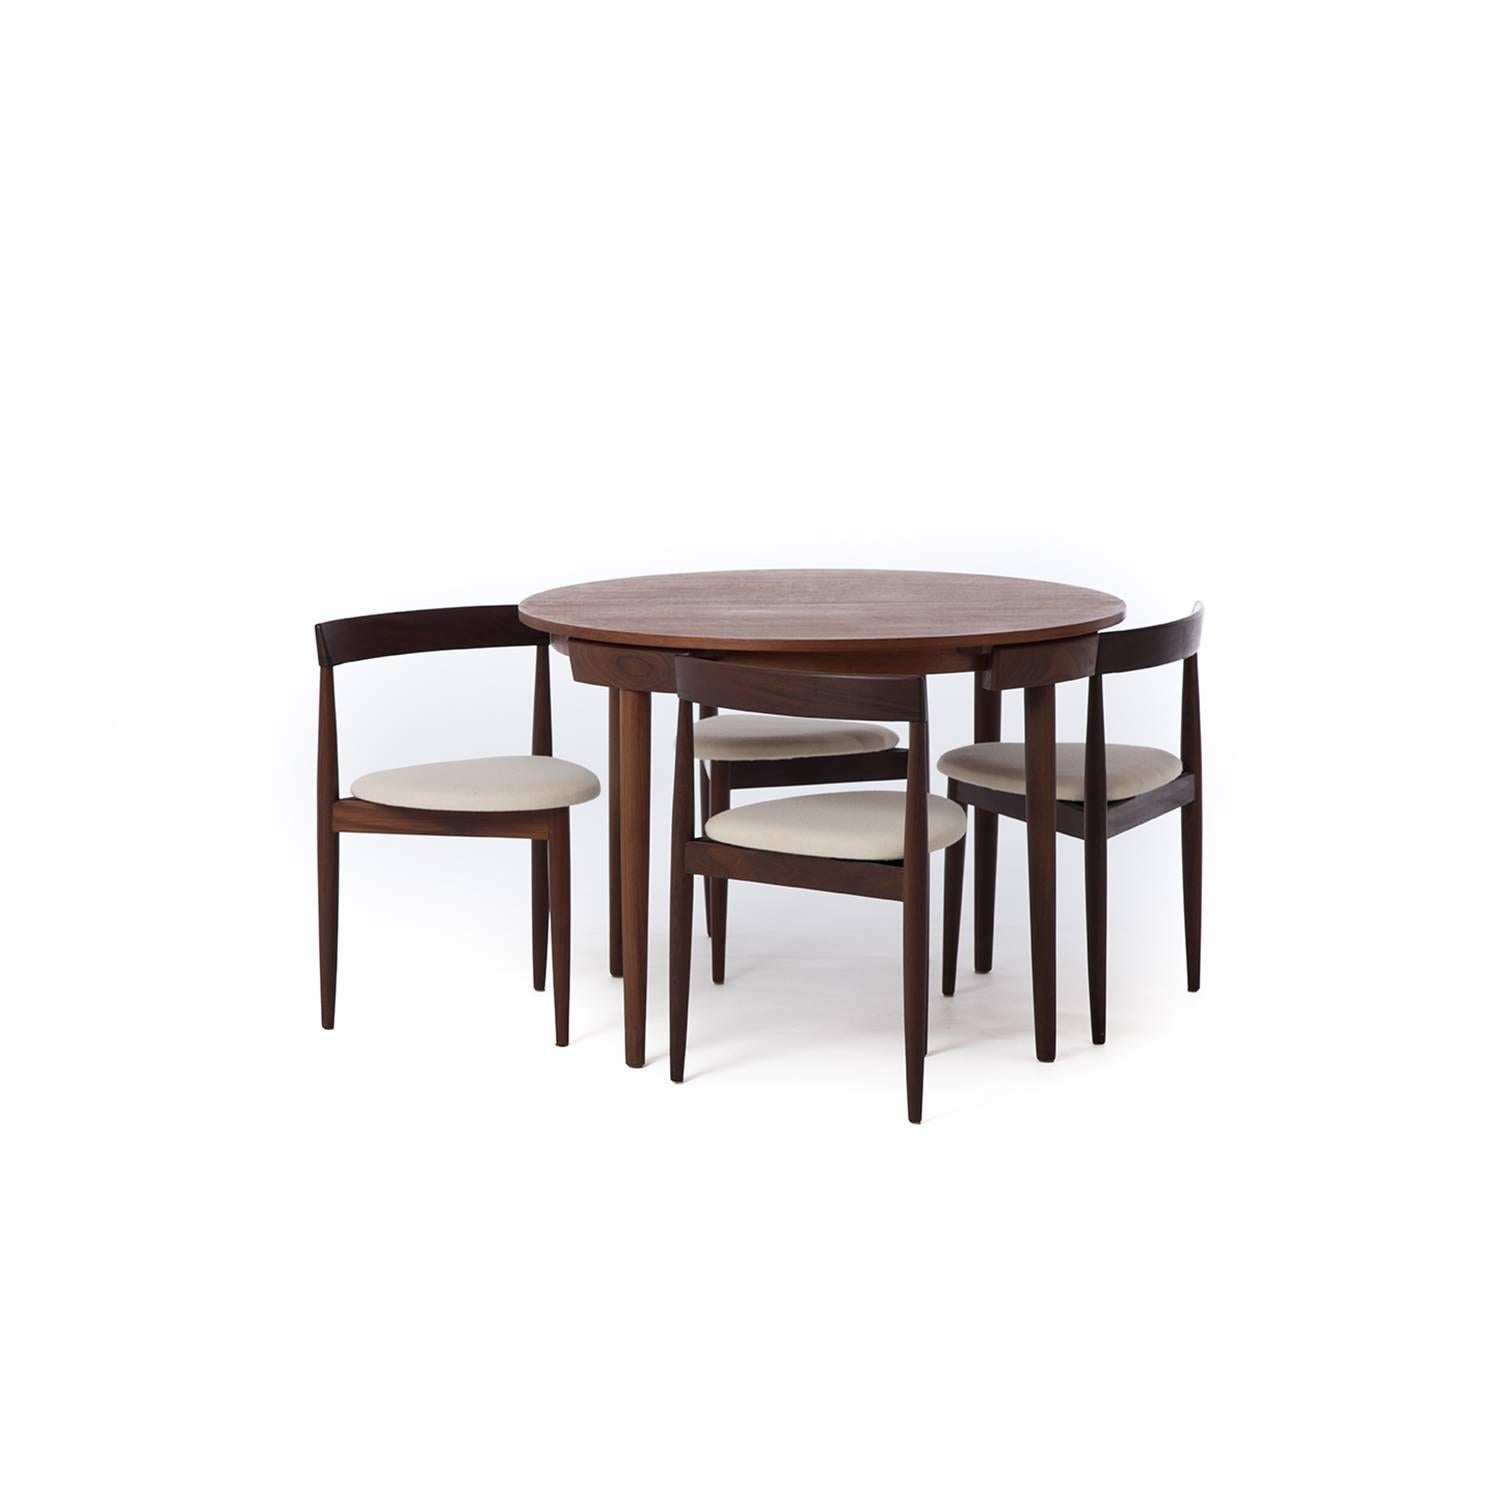 This lovely dinette has four 'disappearing' chairs and a self storing leaf in the centre. The teak has aged to a lovely rich dark tone. Chairs are covered in Danish wool by Kvadrat.
Measures: Table: 42